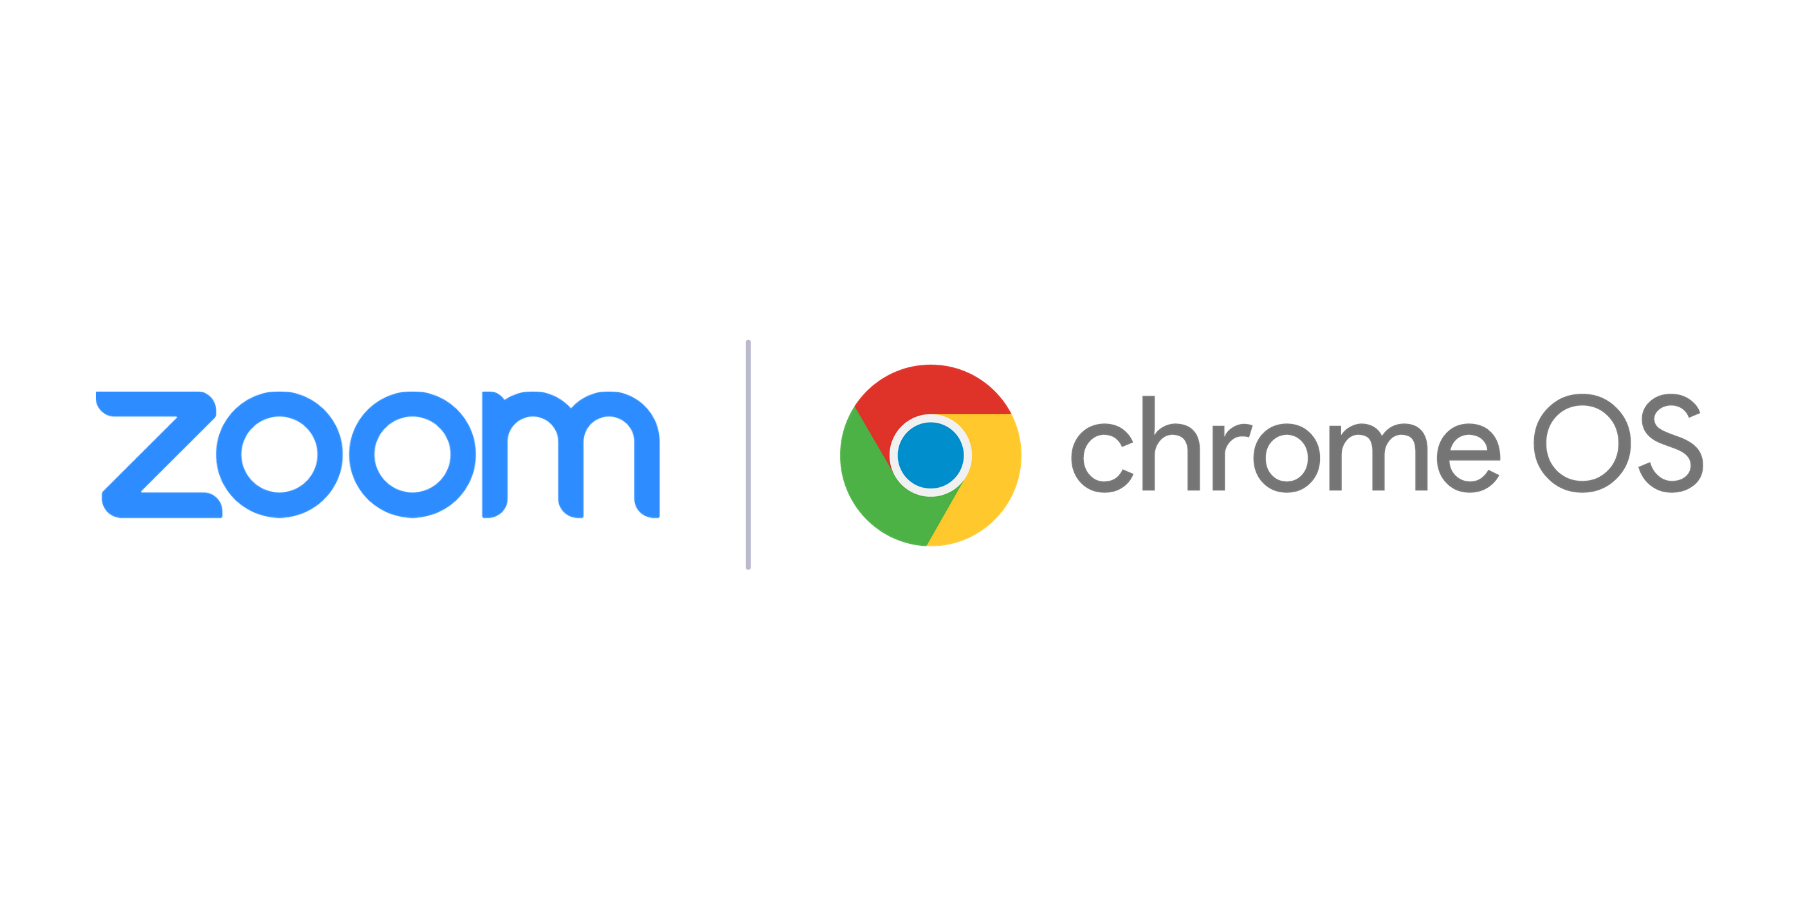 Zoom app for Chromebook adds virtual background support - 9to5Google